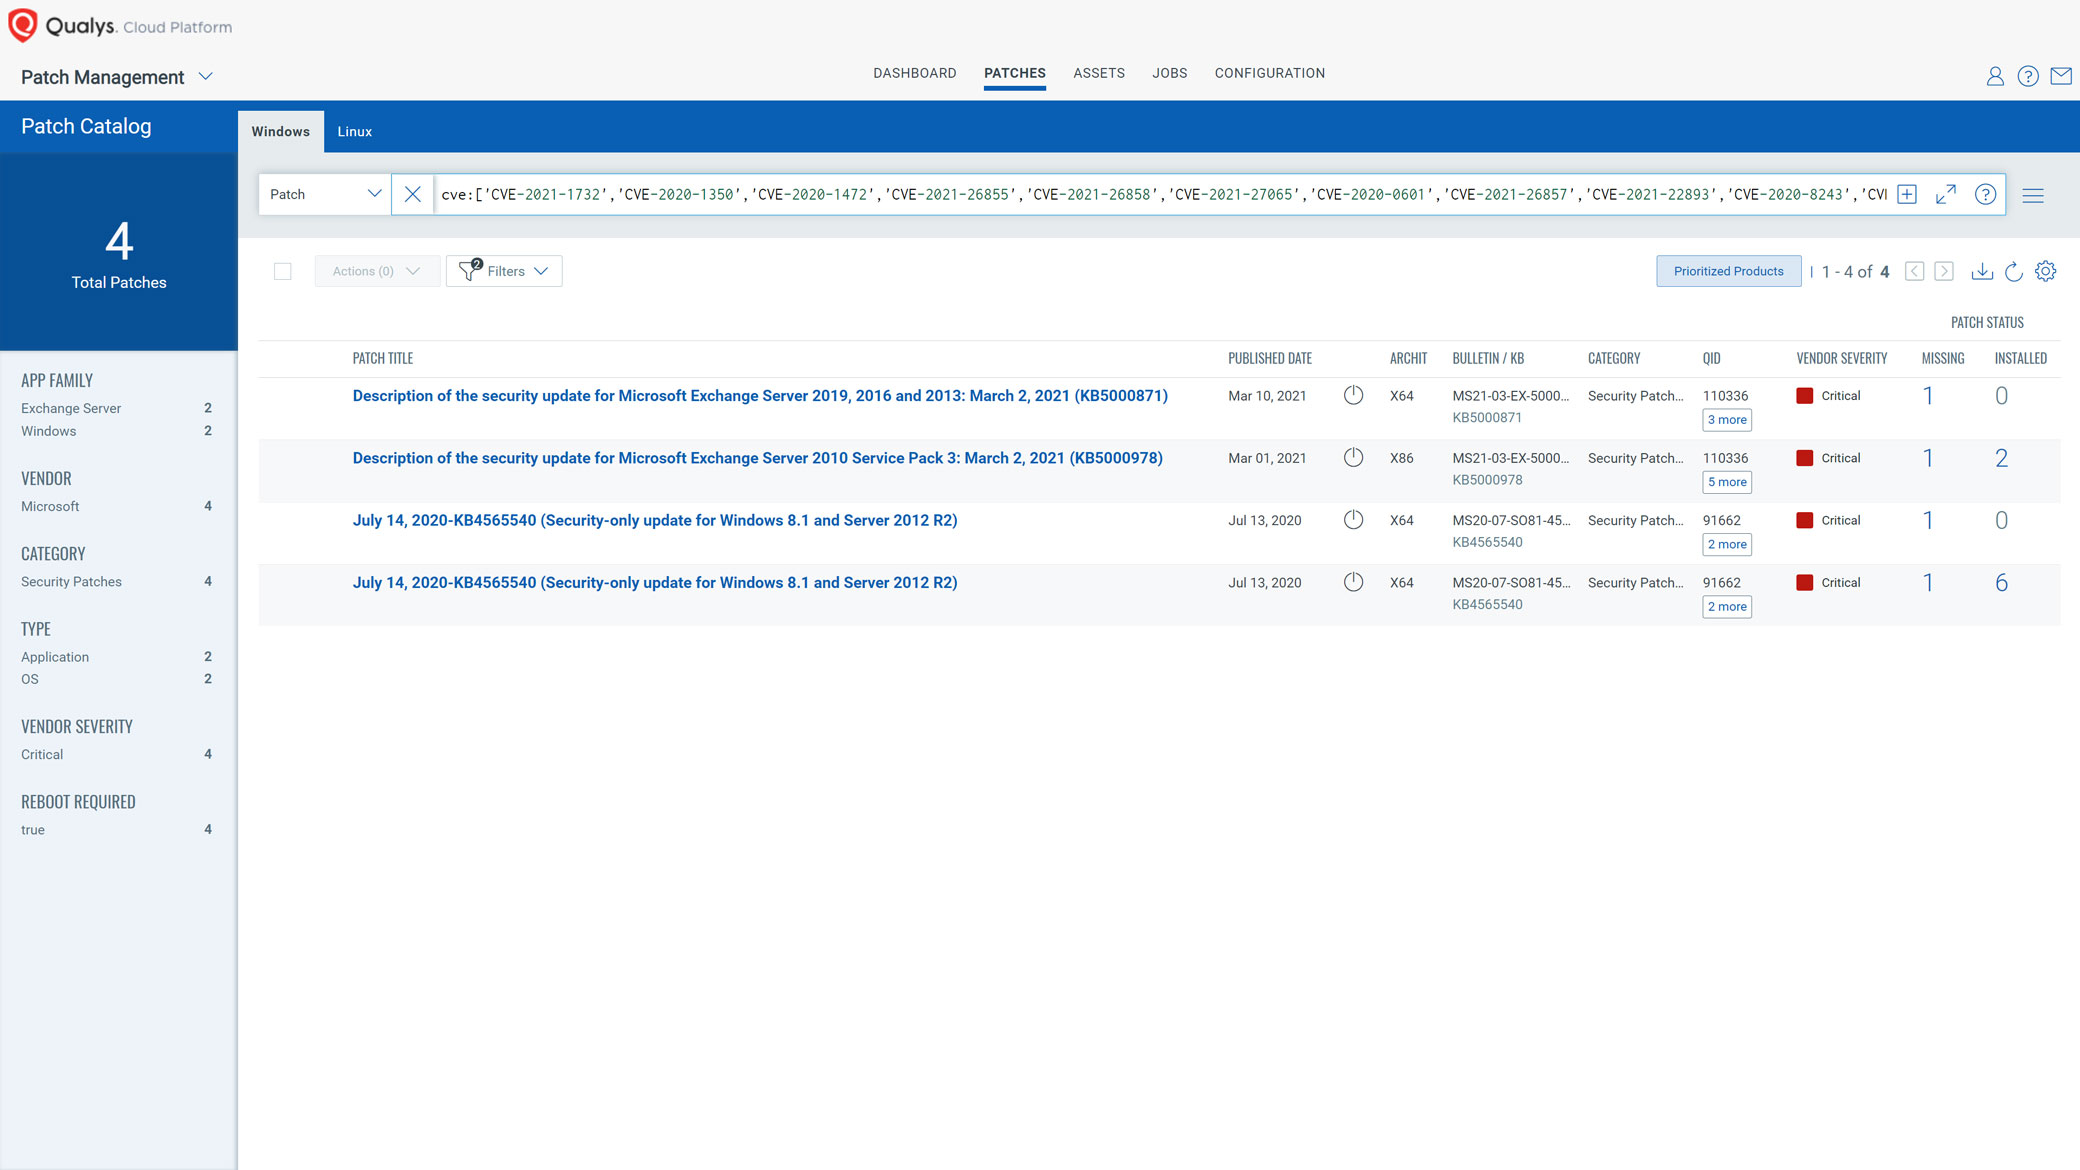 Mail & Deploy Hotfix Release – Mail & Deploy